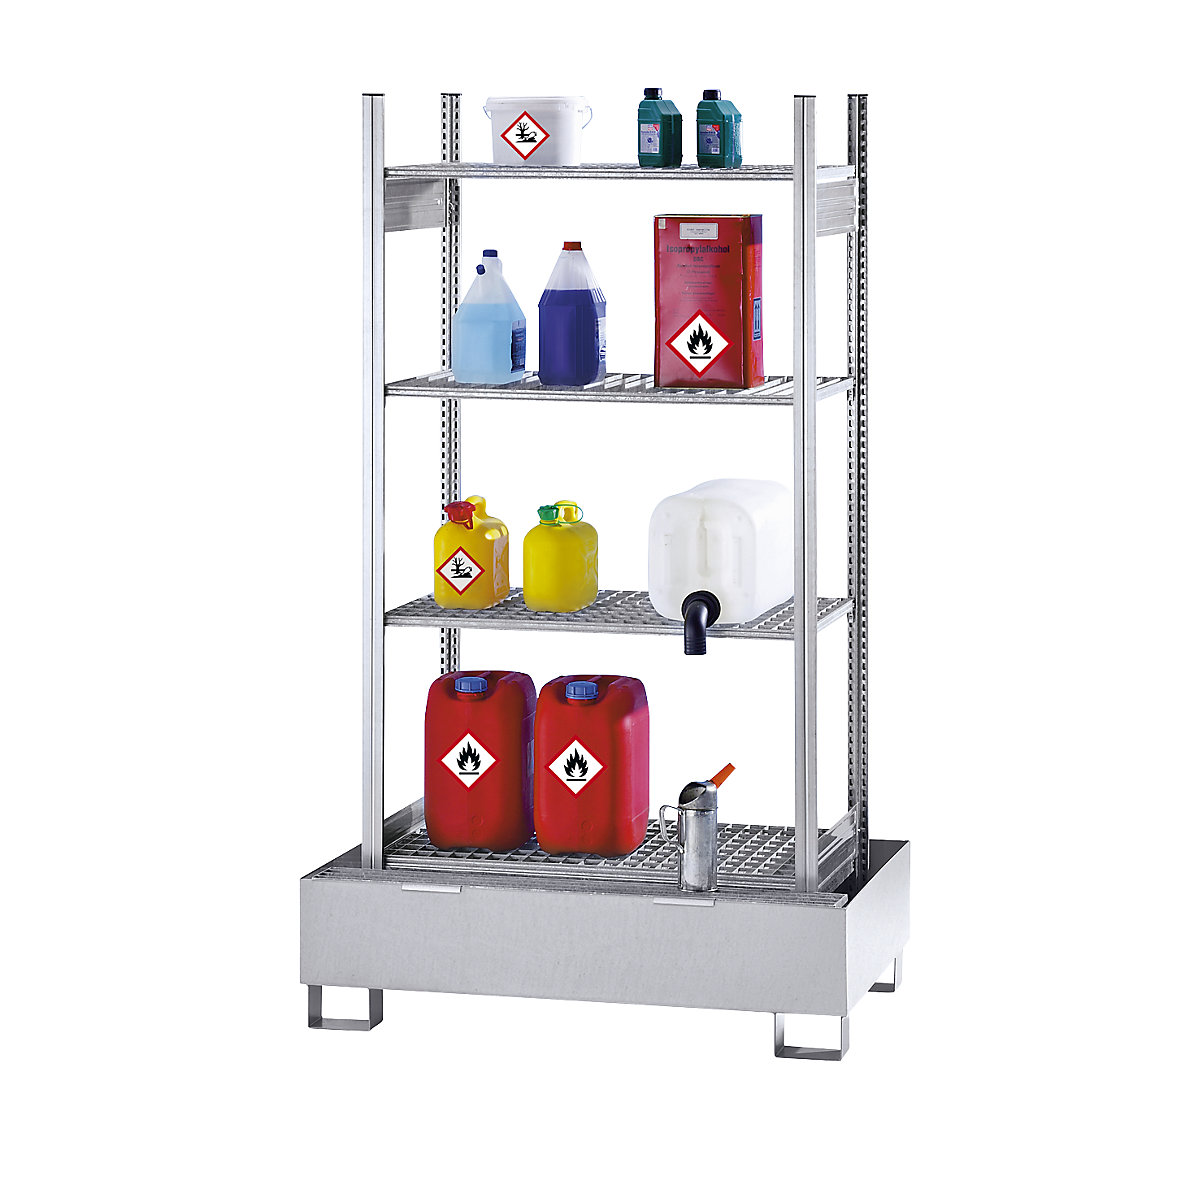 Hazardous goods shelving for small containers, for water hazardous and flammable media, 4 mesh shelves, 1 base sump tray, sump tray hot dip galvanised